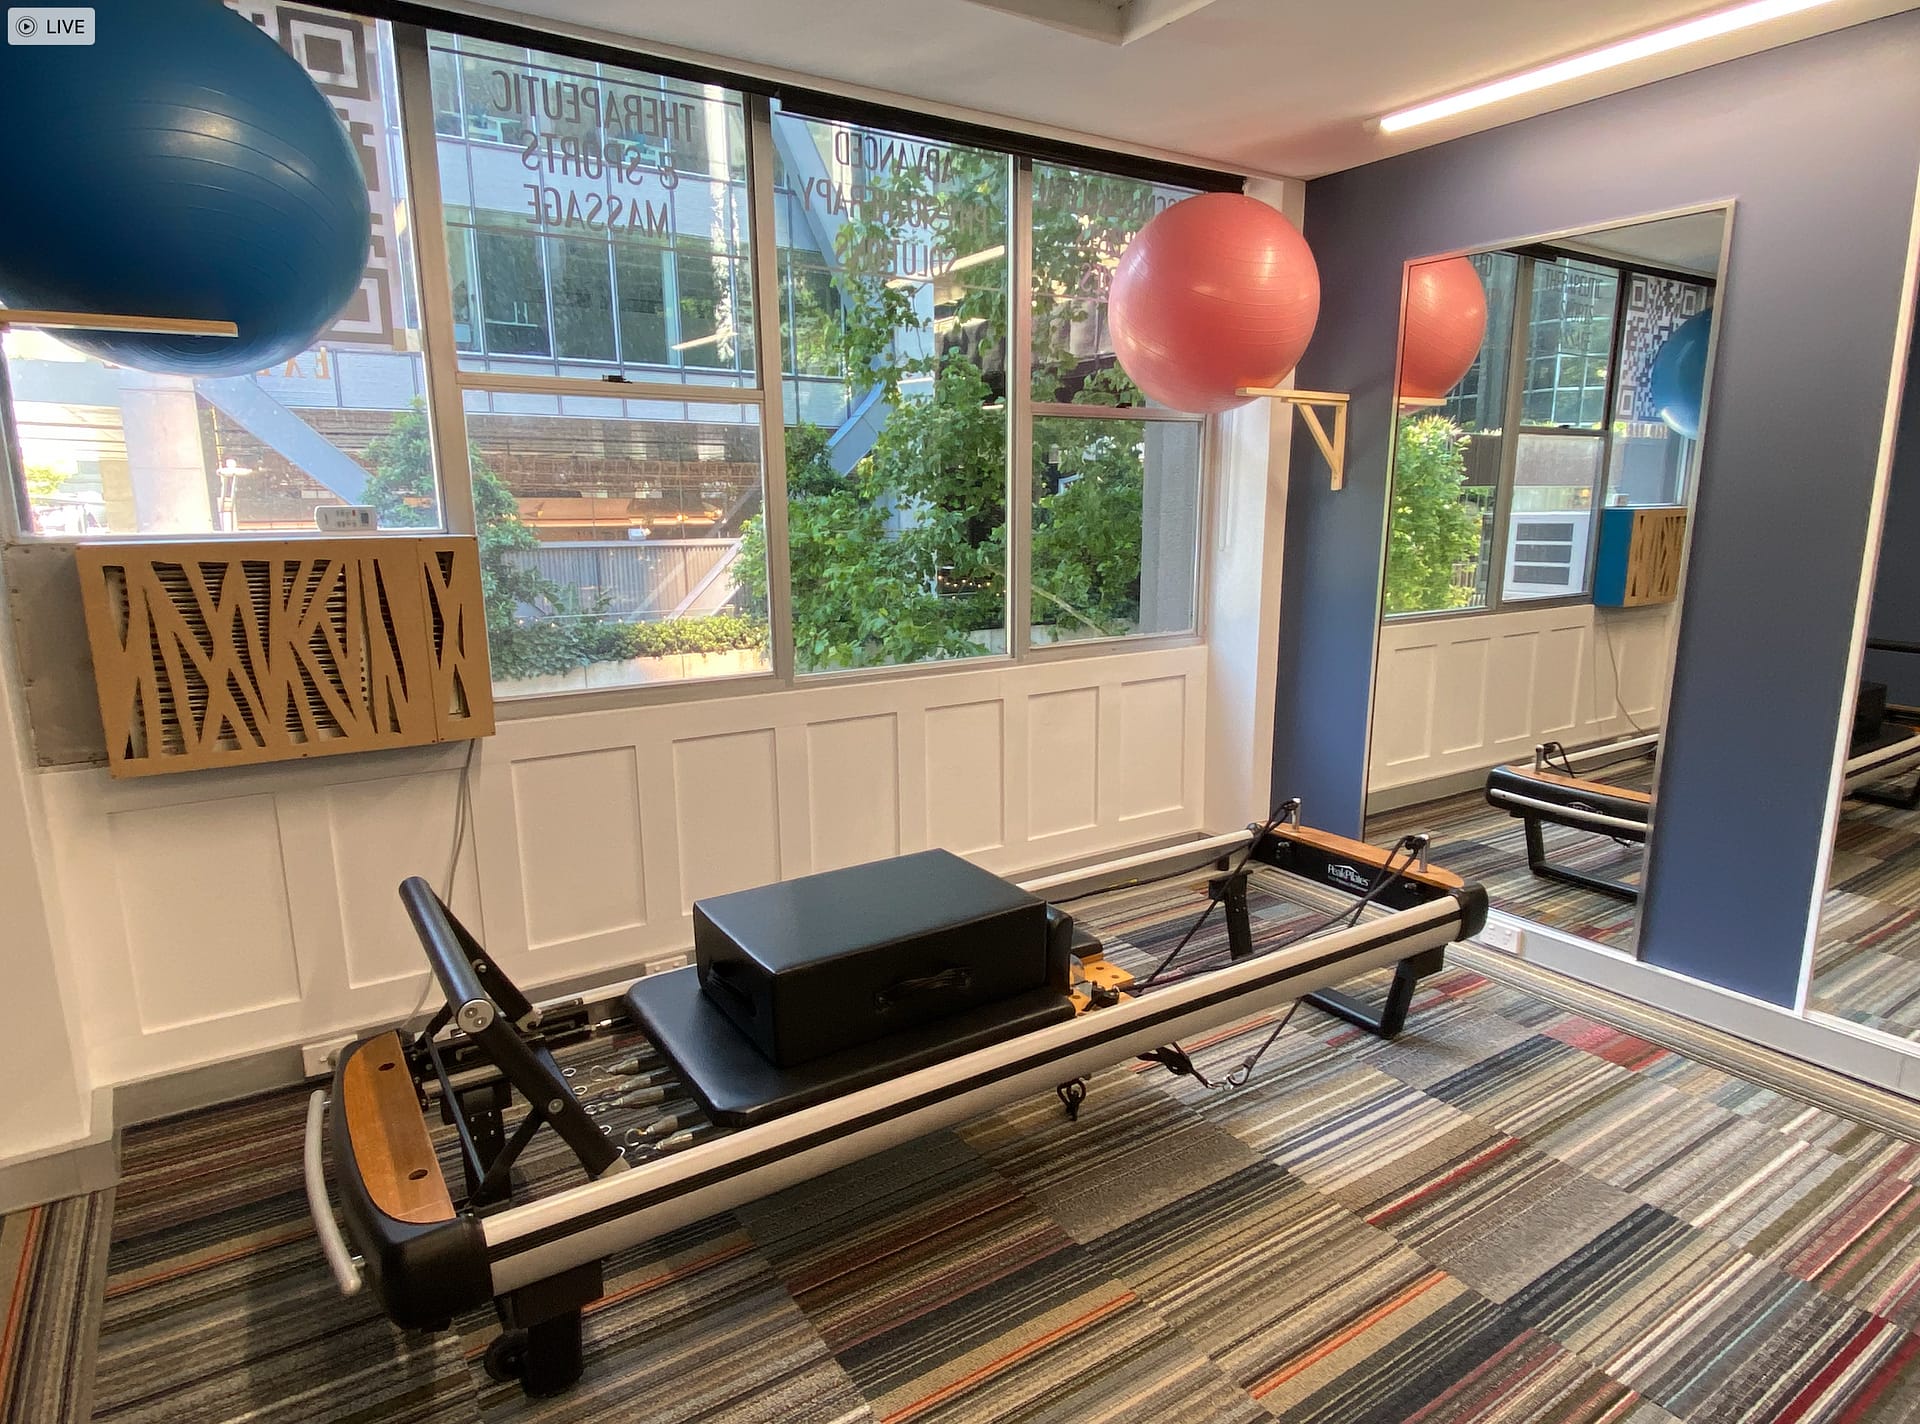 Pilates Reformer at Function & Form